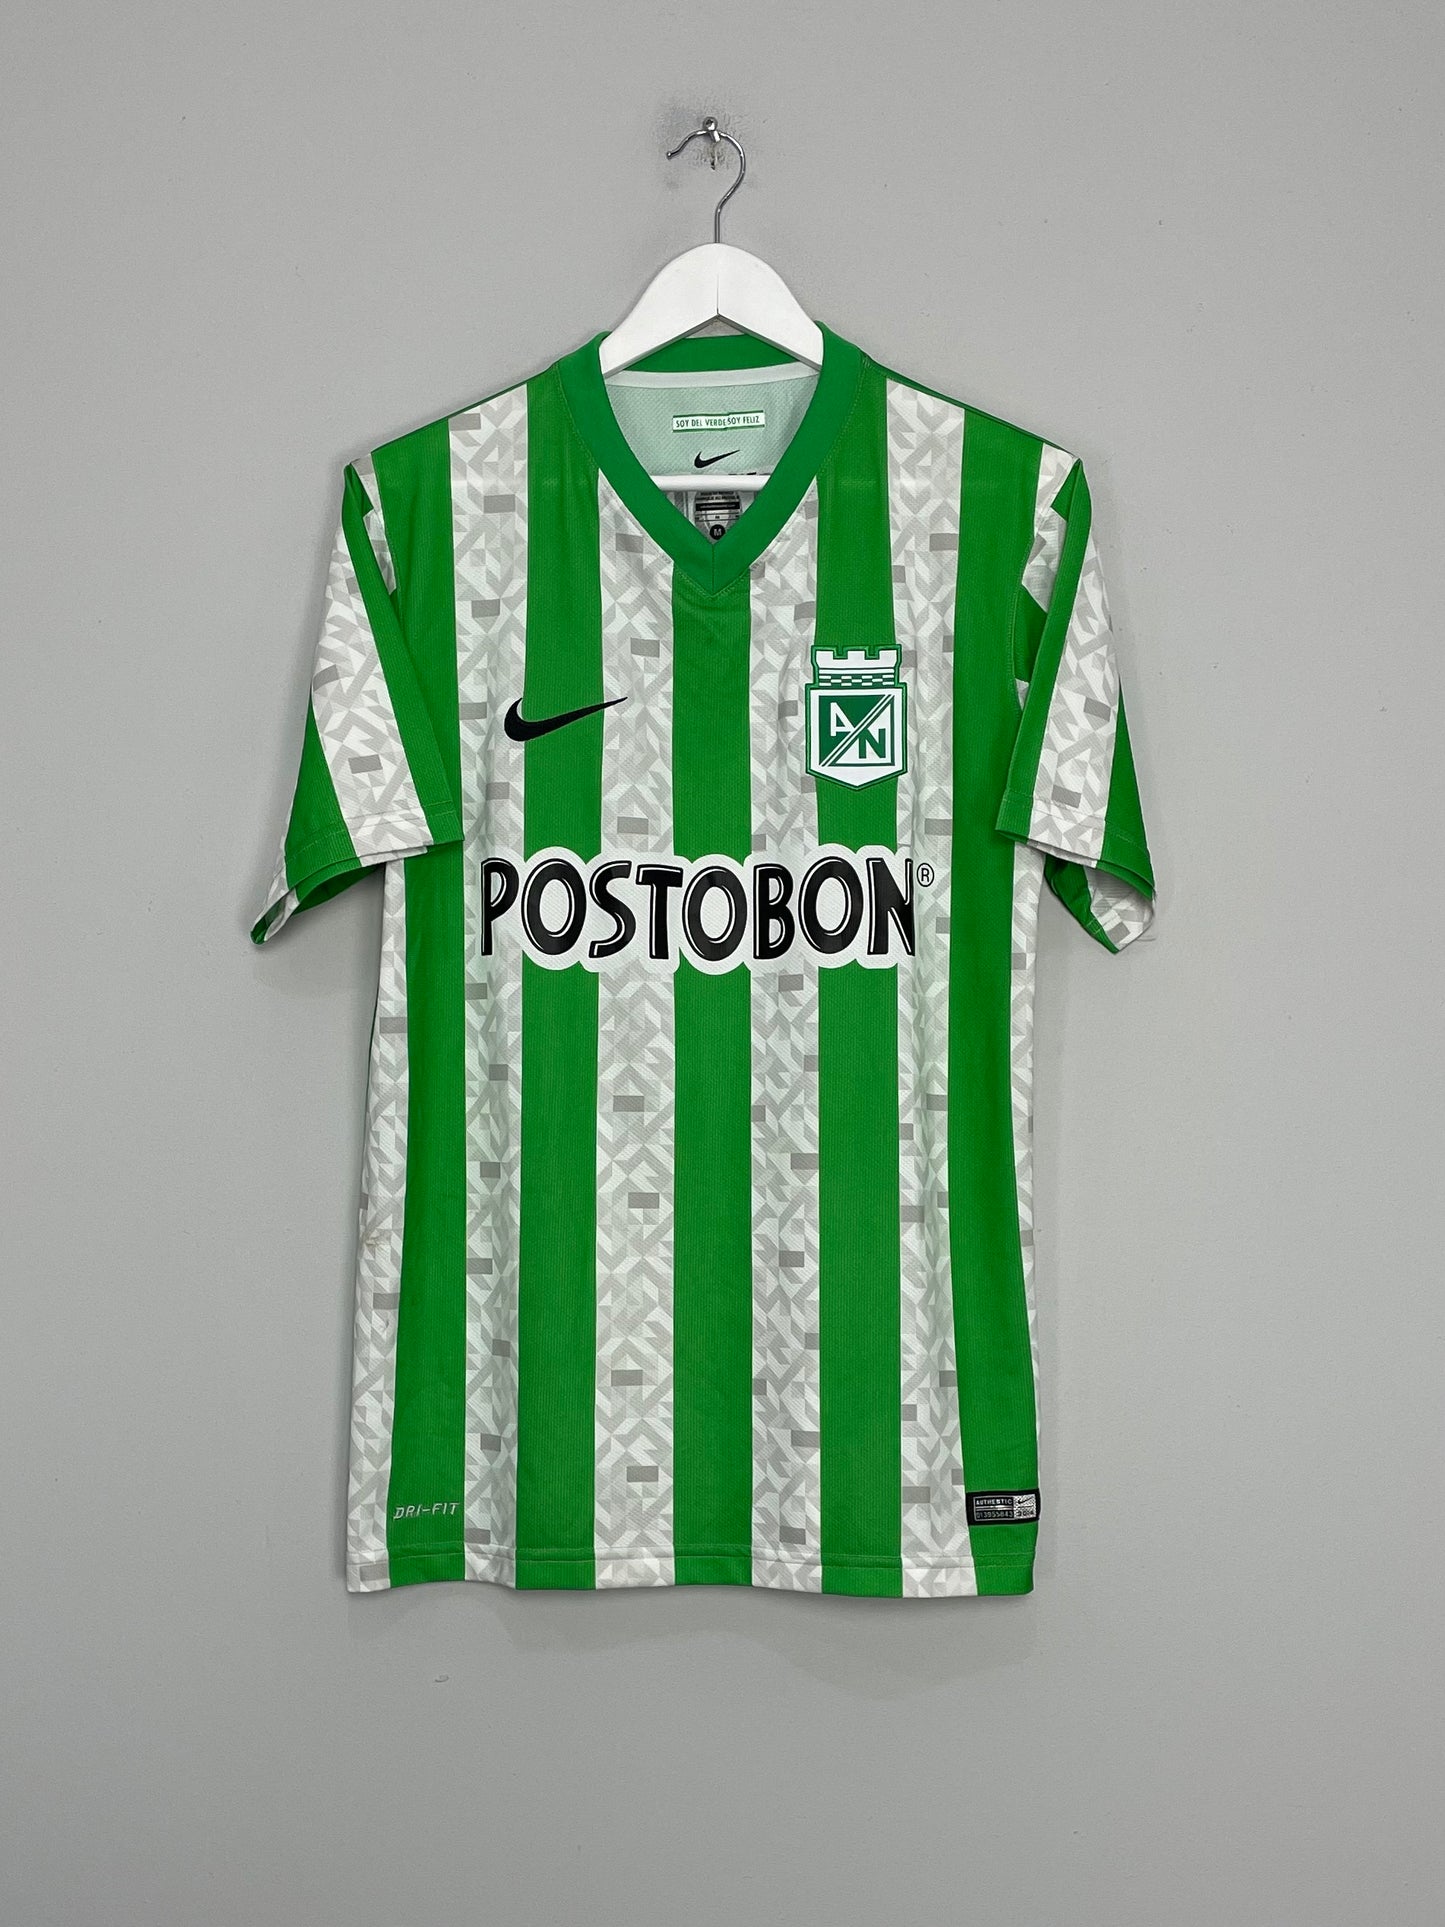 Image of the Atletico National shirt from the 2014/15 season